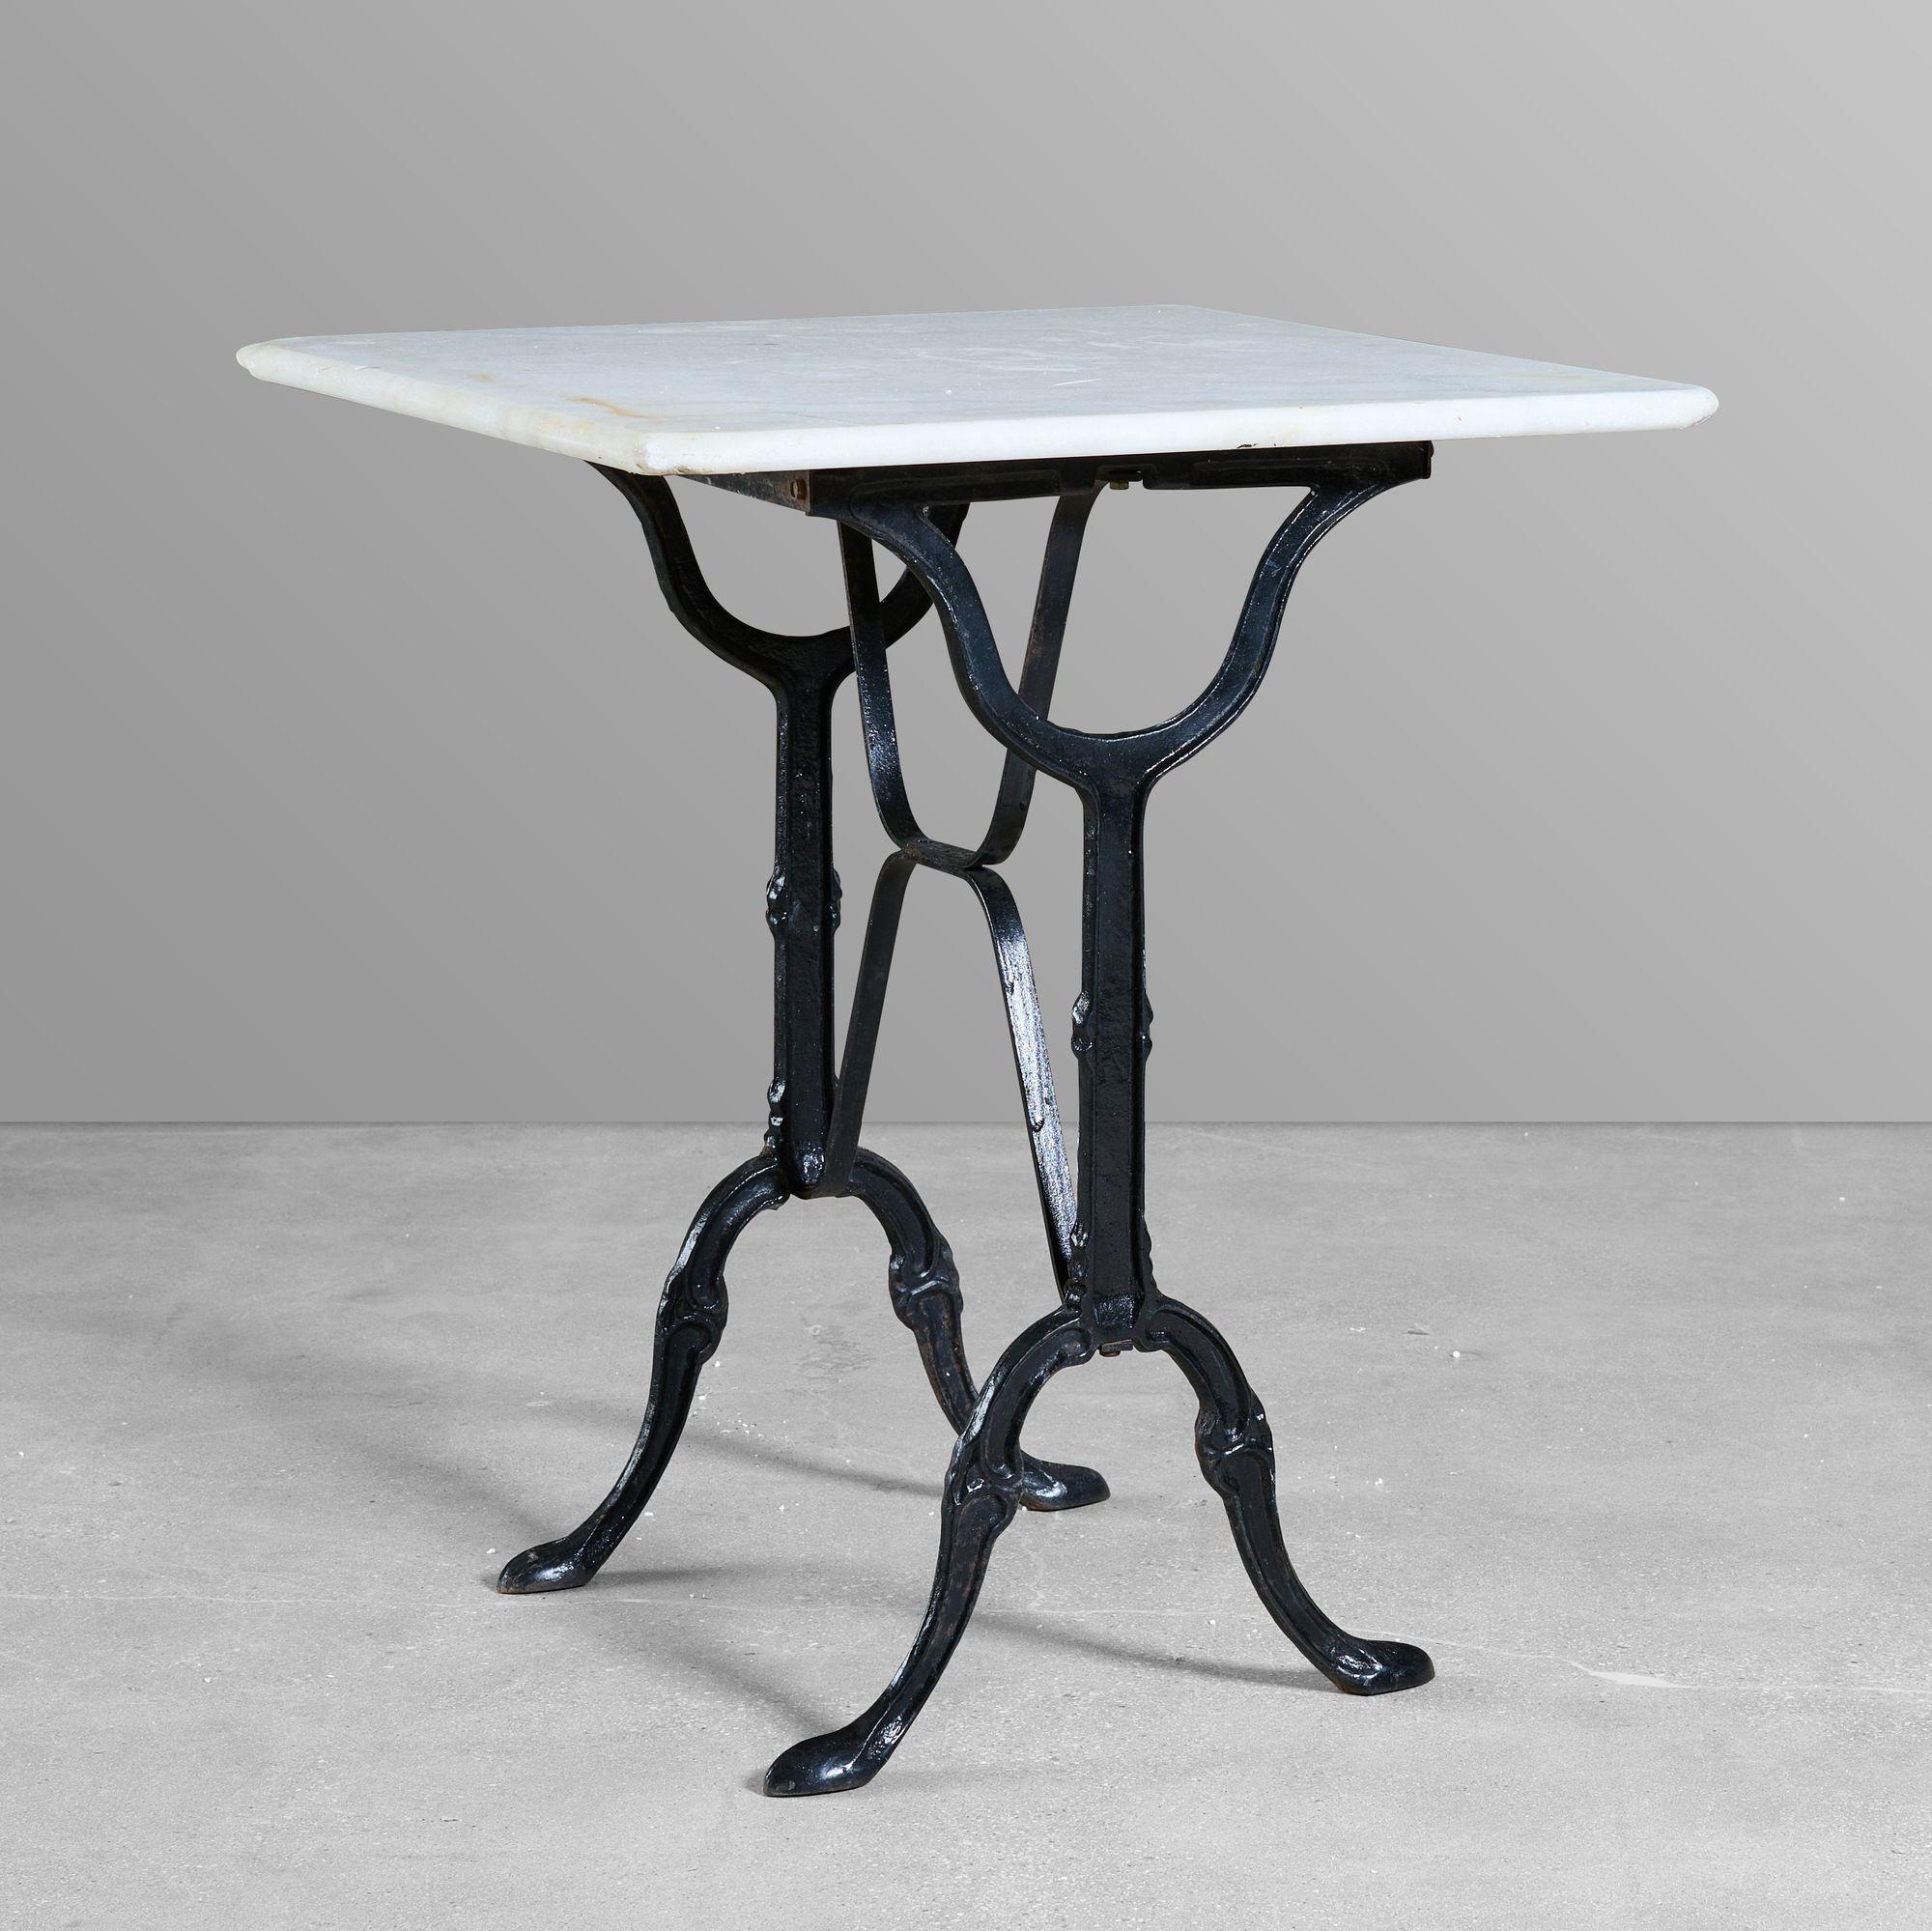 Cast iron cafe table with a marble top.